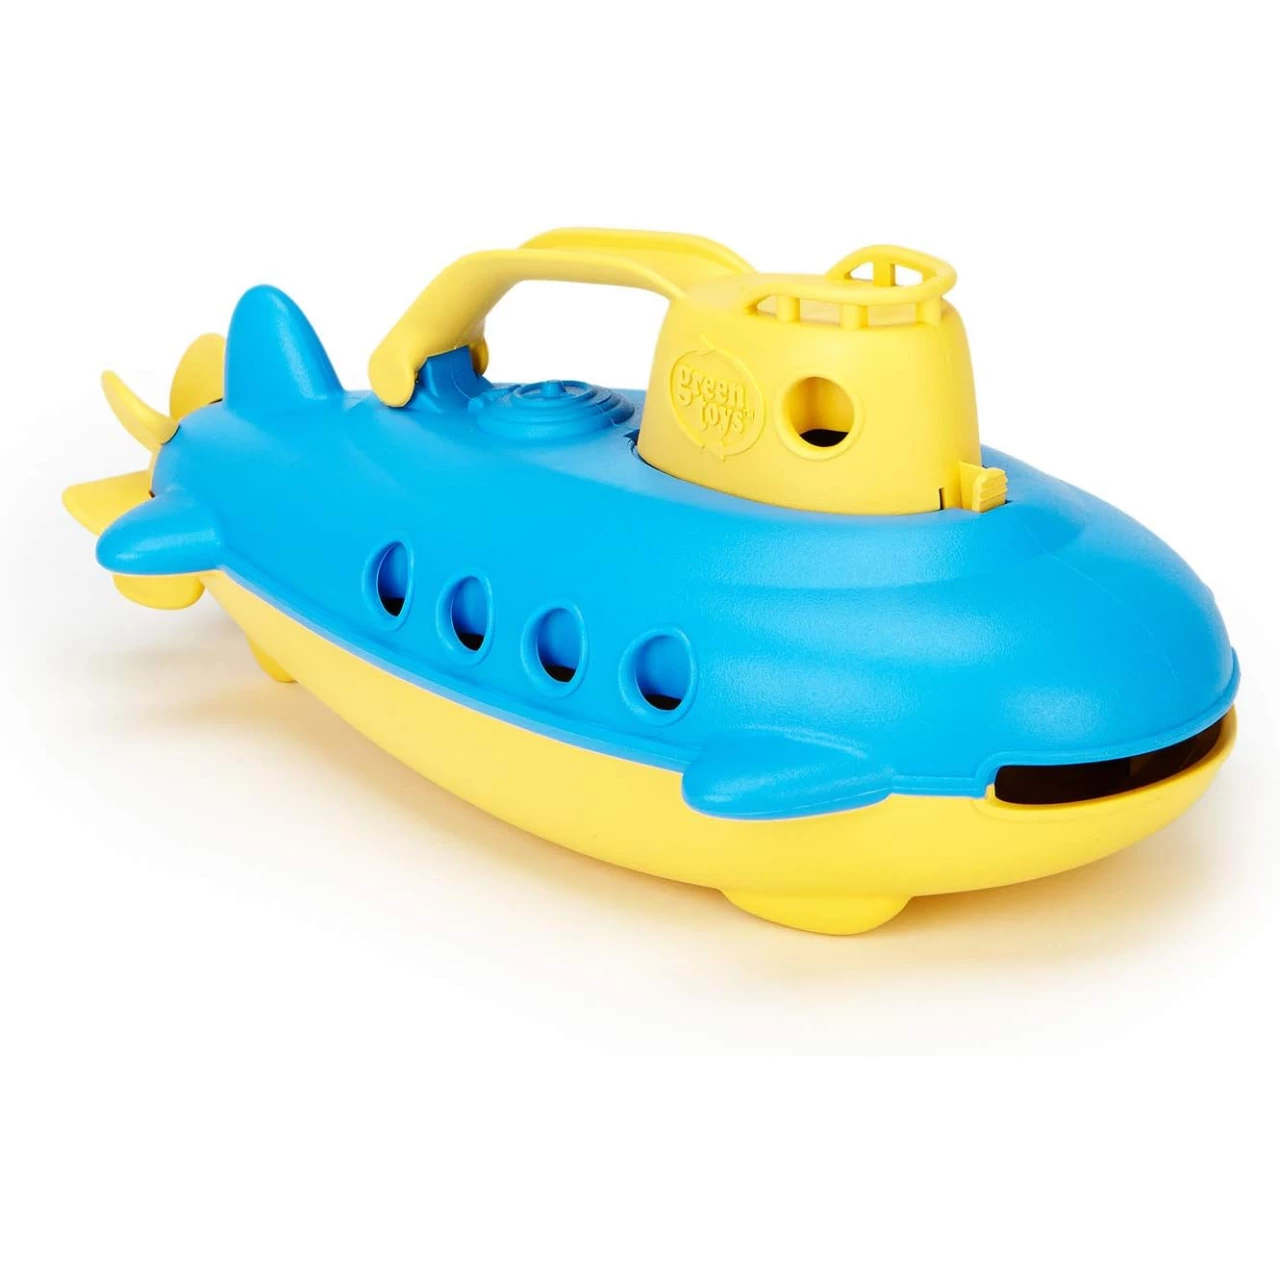 Green Toys Submarine in Yellow &amp; Blue - BPA Free, Phthalate Free, Bath Toy